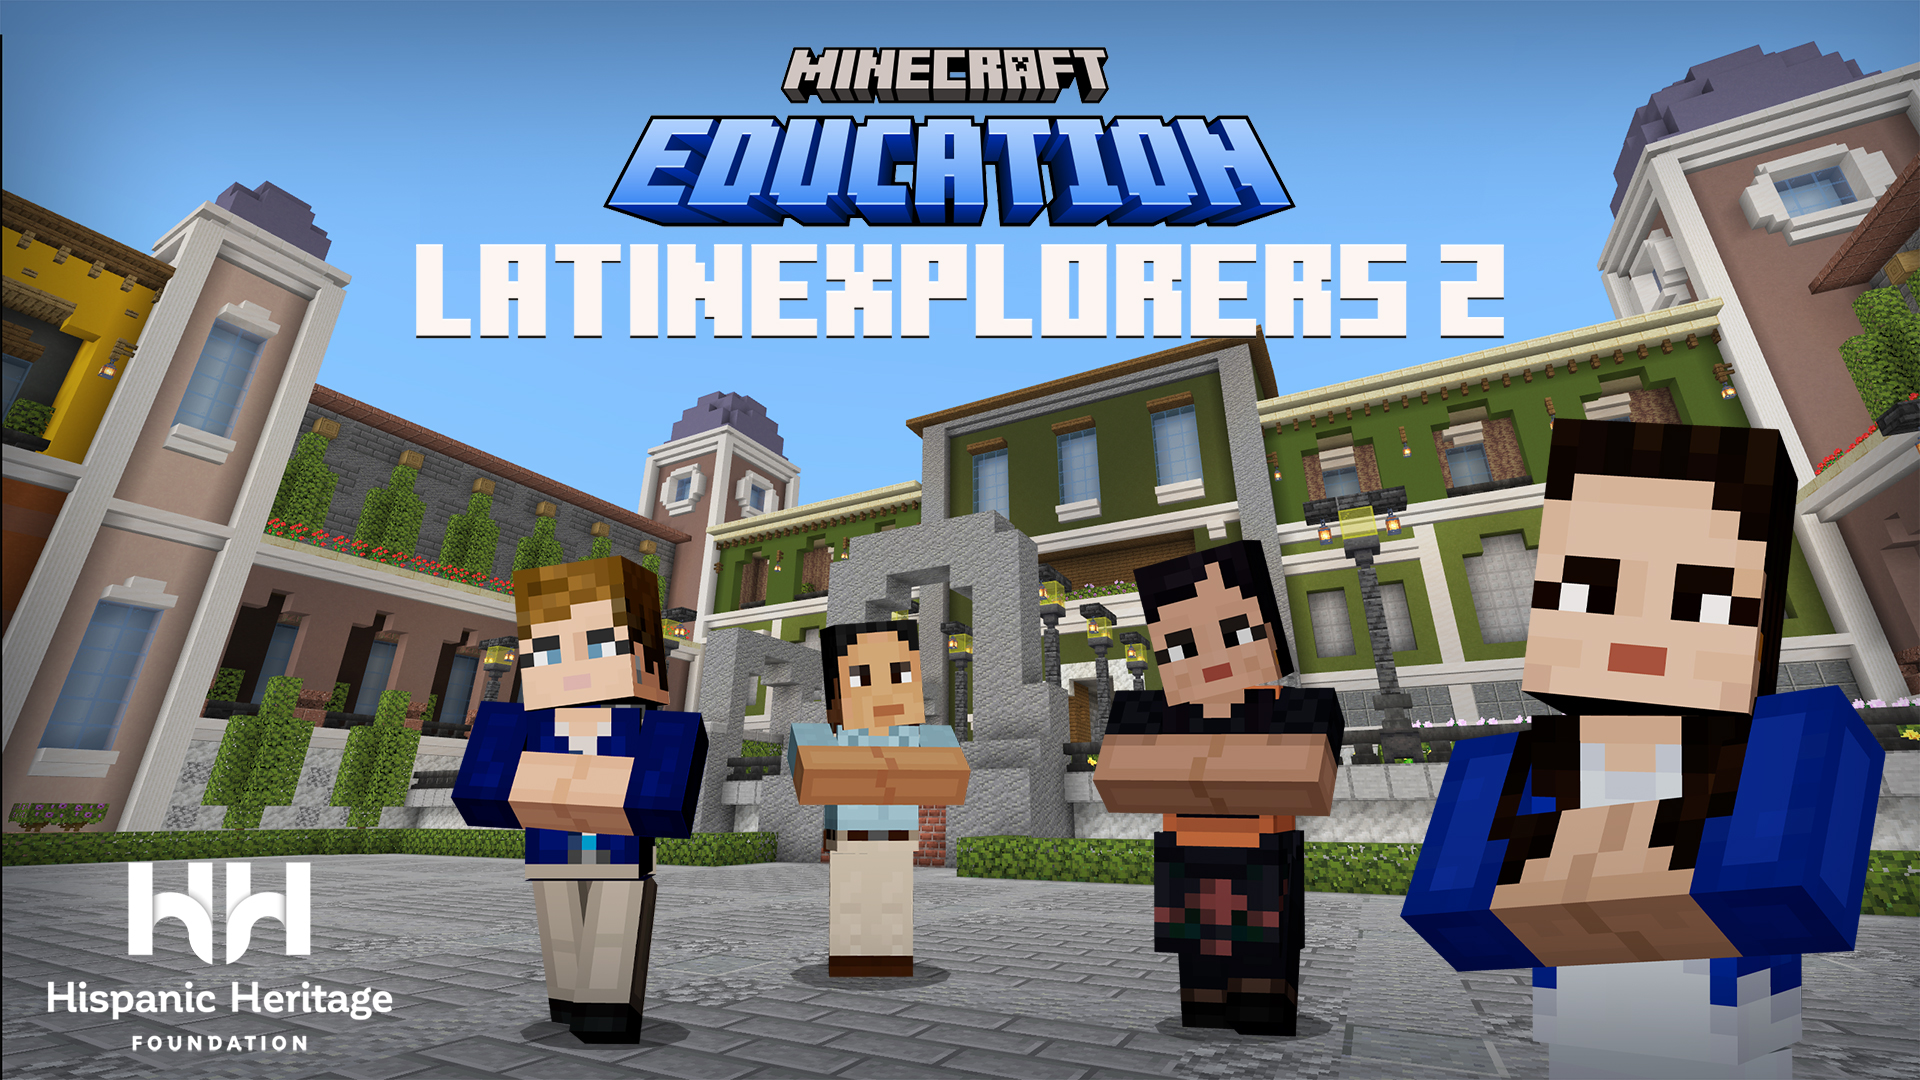 Minecraft Education LatinExplorers 2 with Hispanic Heritage Foundation featuring four game characters.